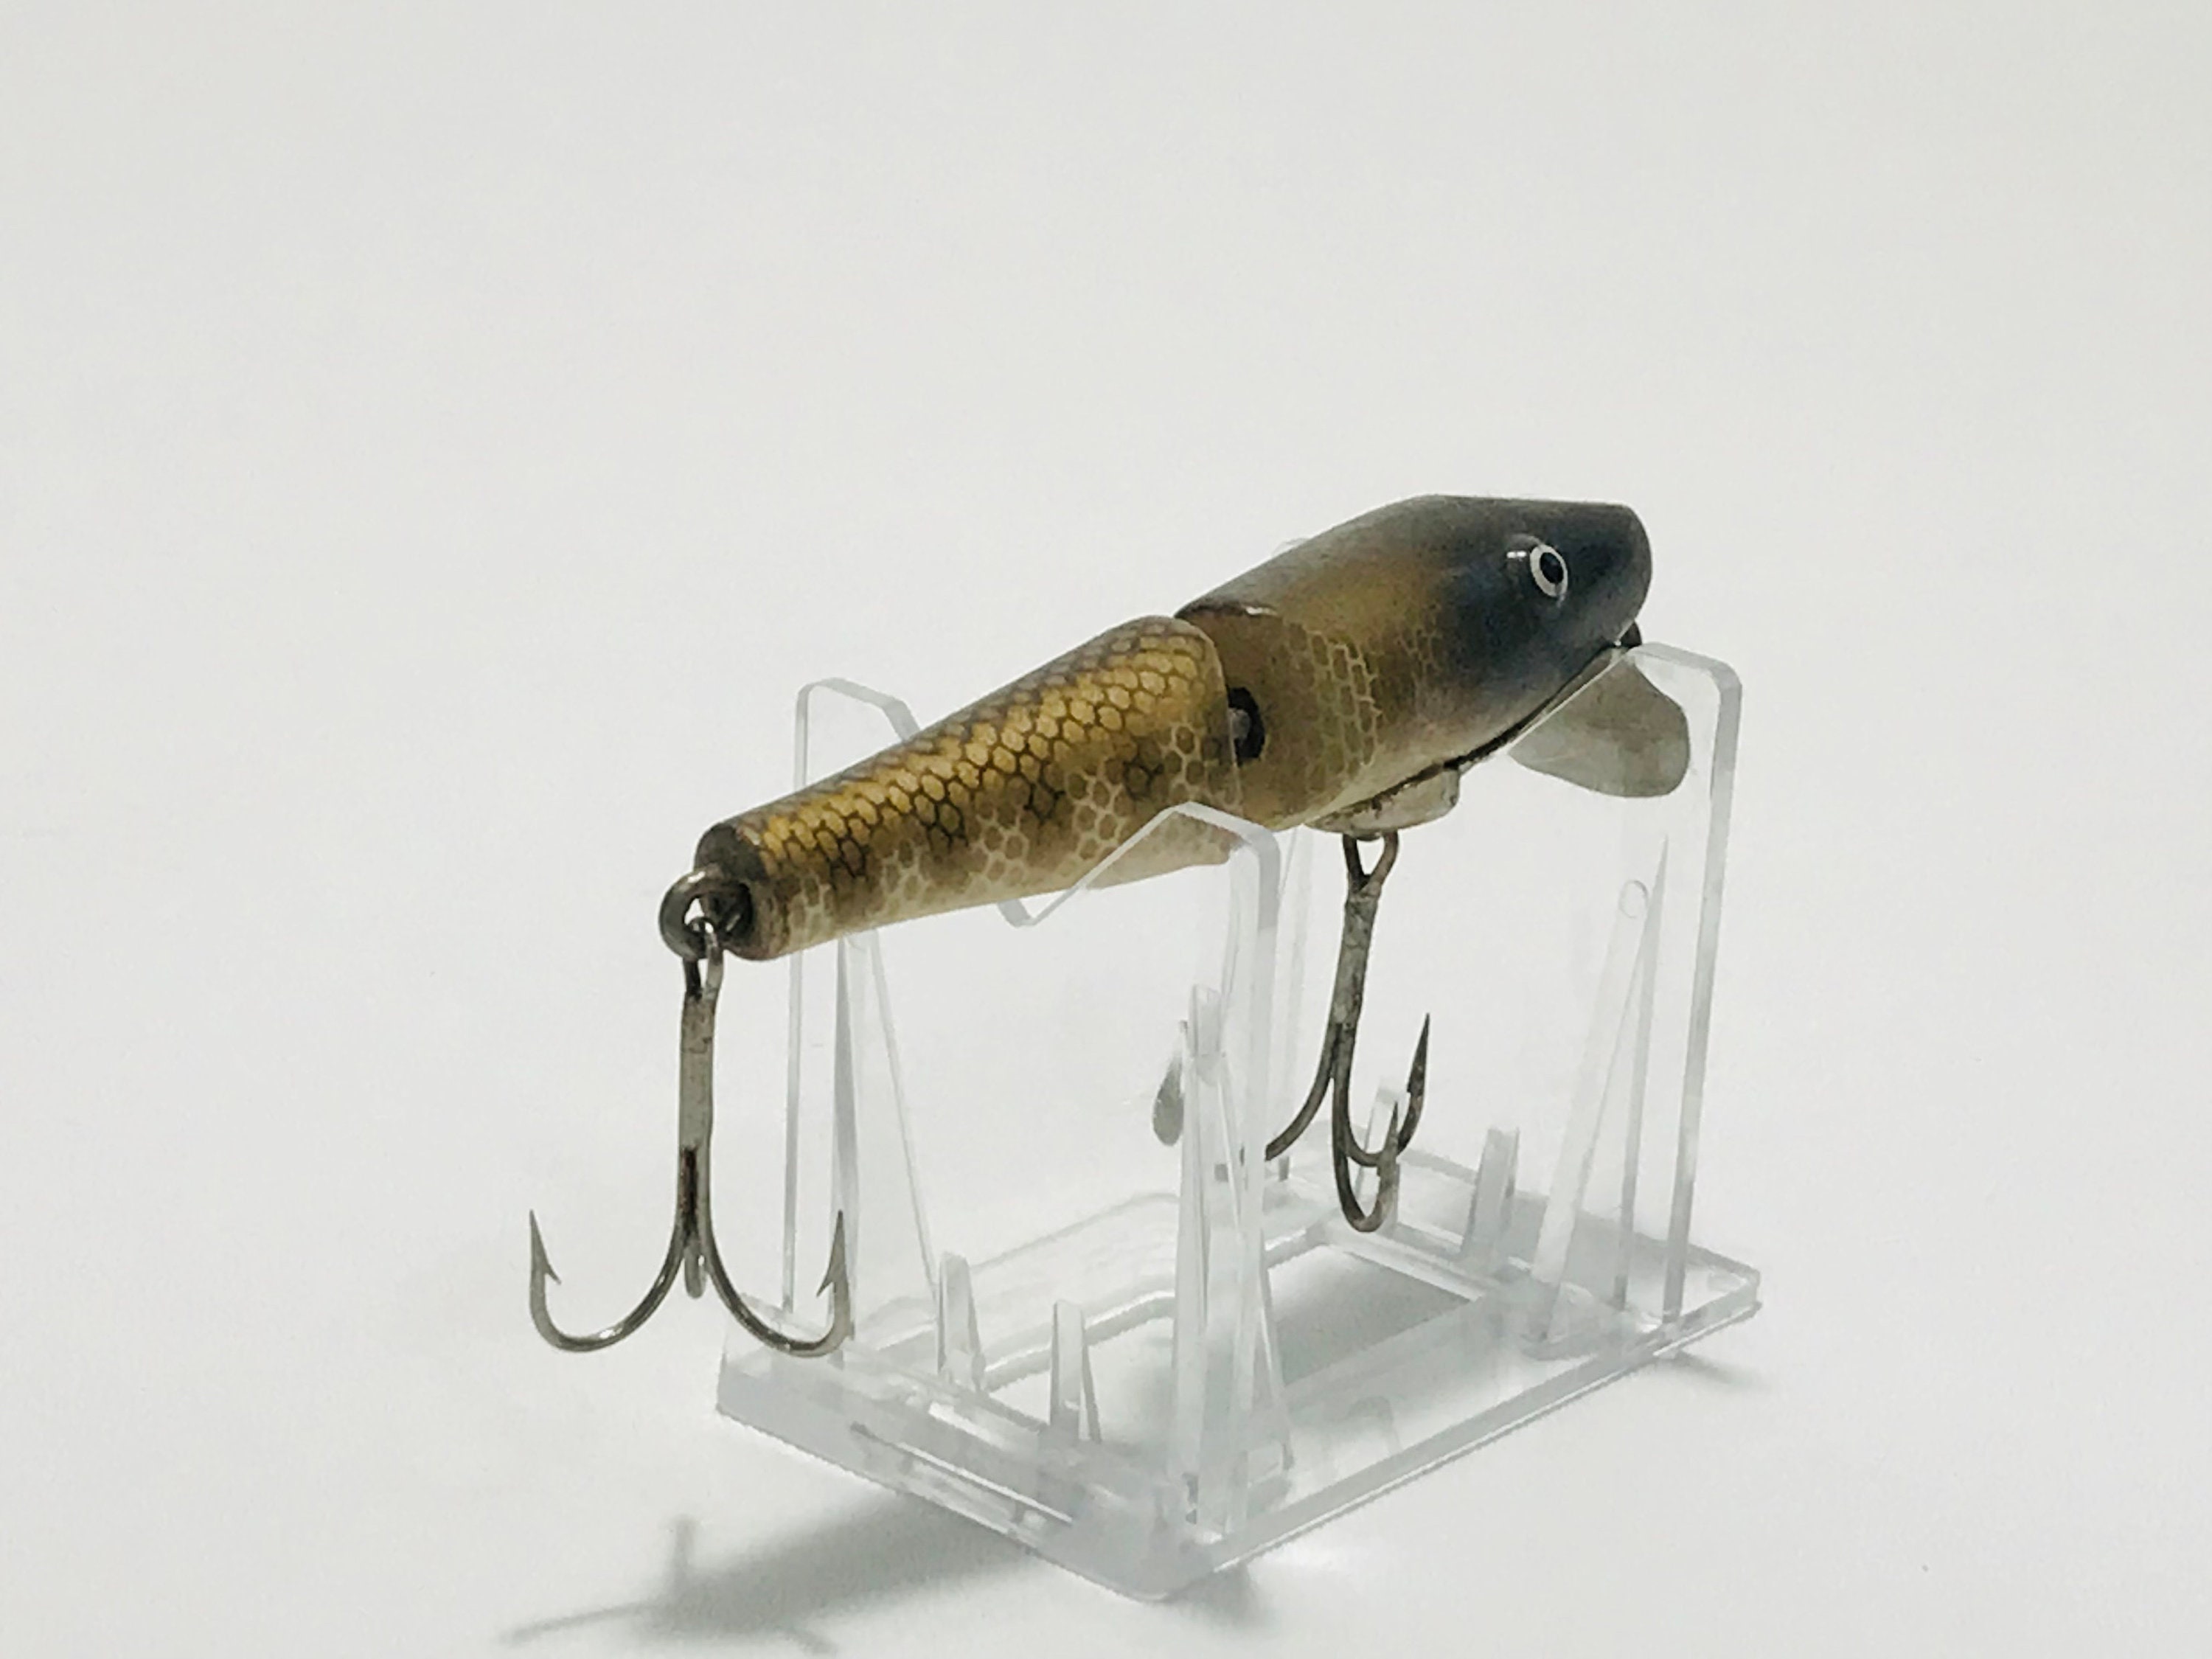 Vtg Fishing Lure PAW PAW Jointed Painted Eye Wood Pikie Minnow